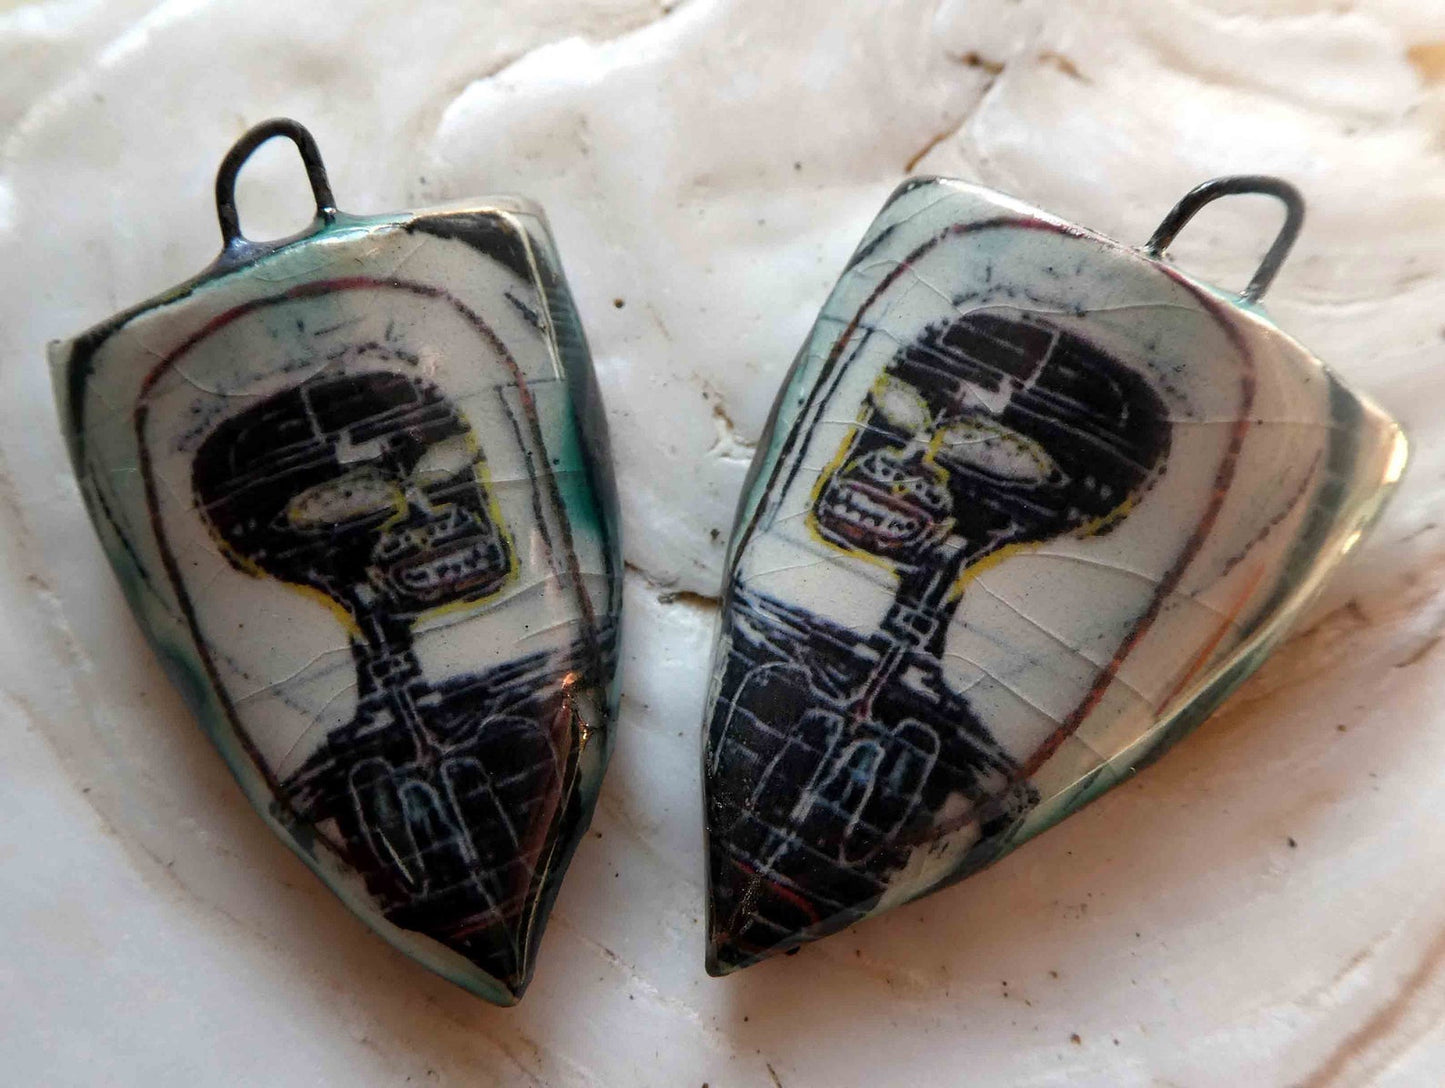 Ceramic Decal Basquiat Shield Earring Charms #7